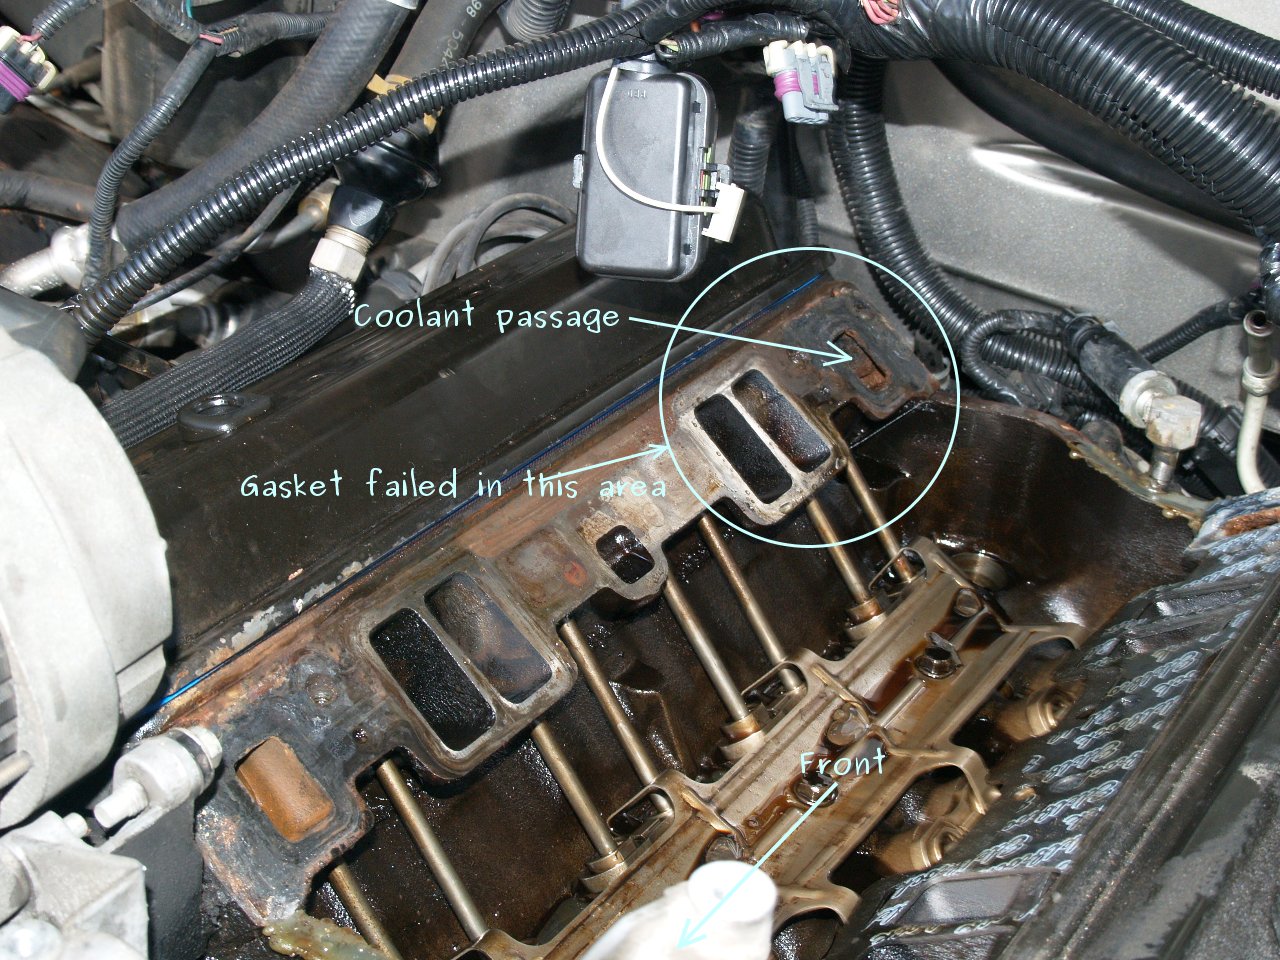 See P0785 in engine